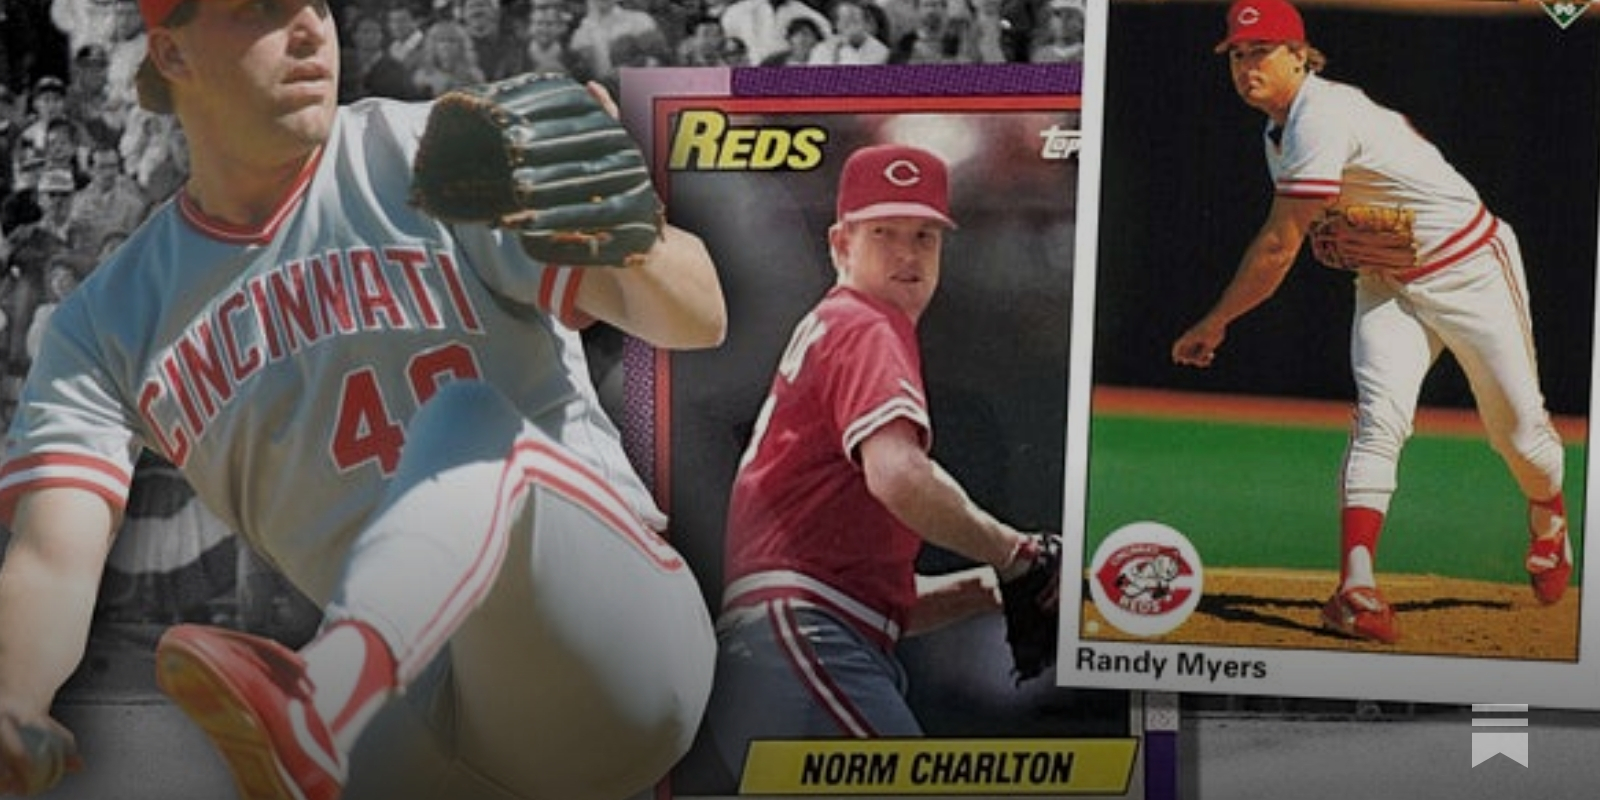 Day 78: Rob Dibble, Nasty Boy and 1990-91 Reds All-Star